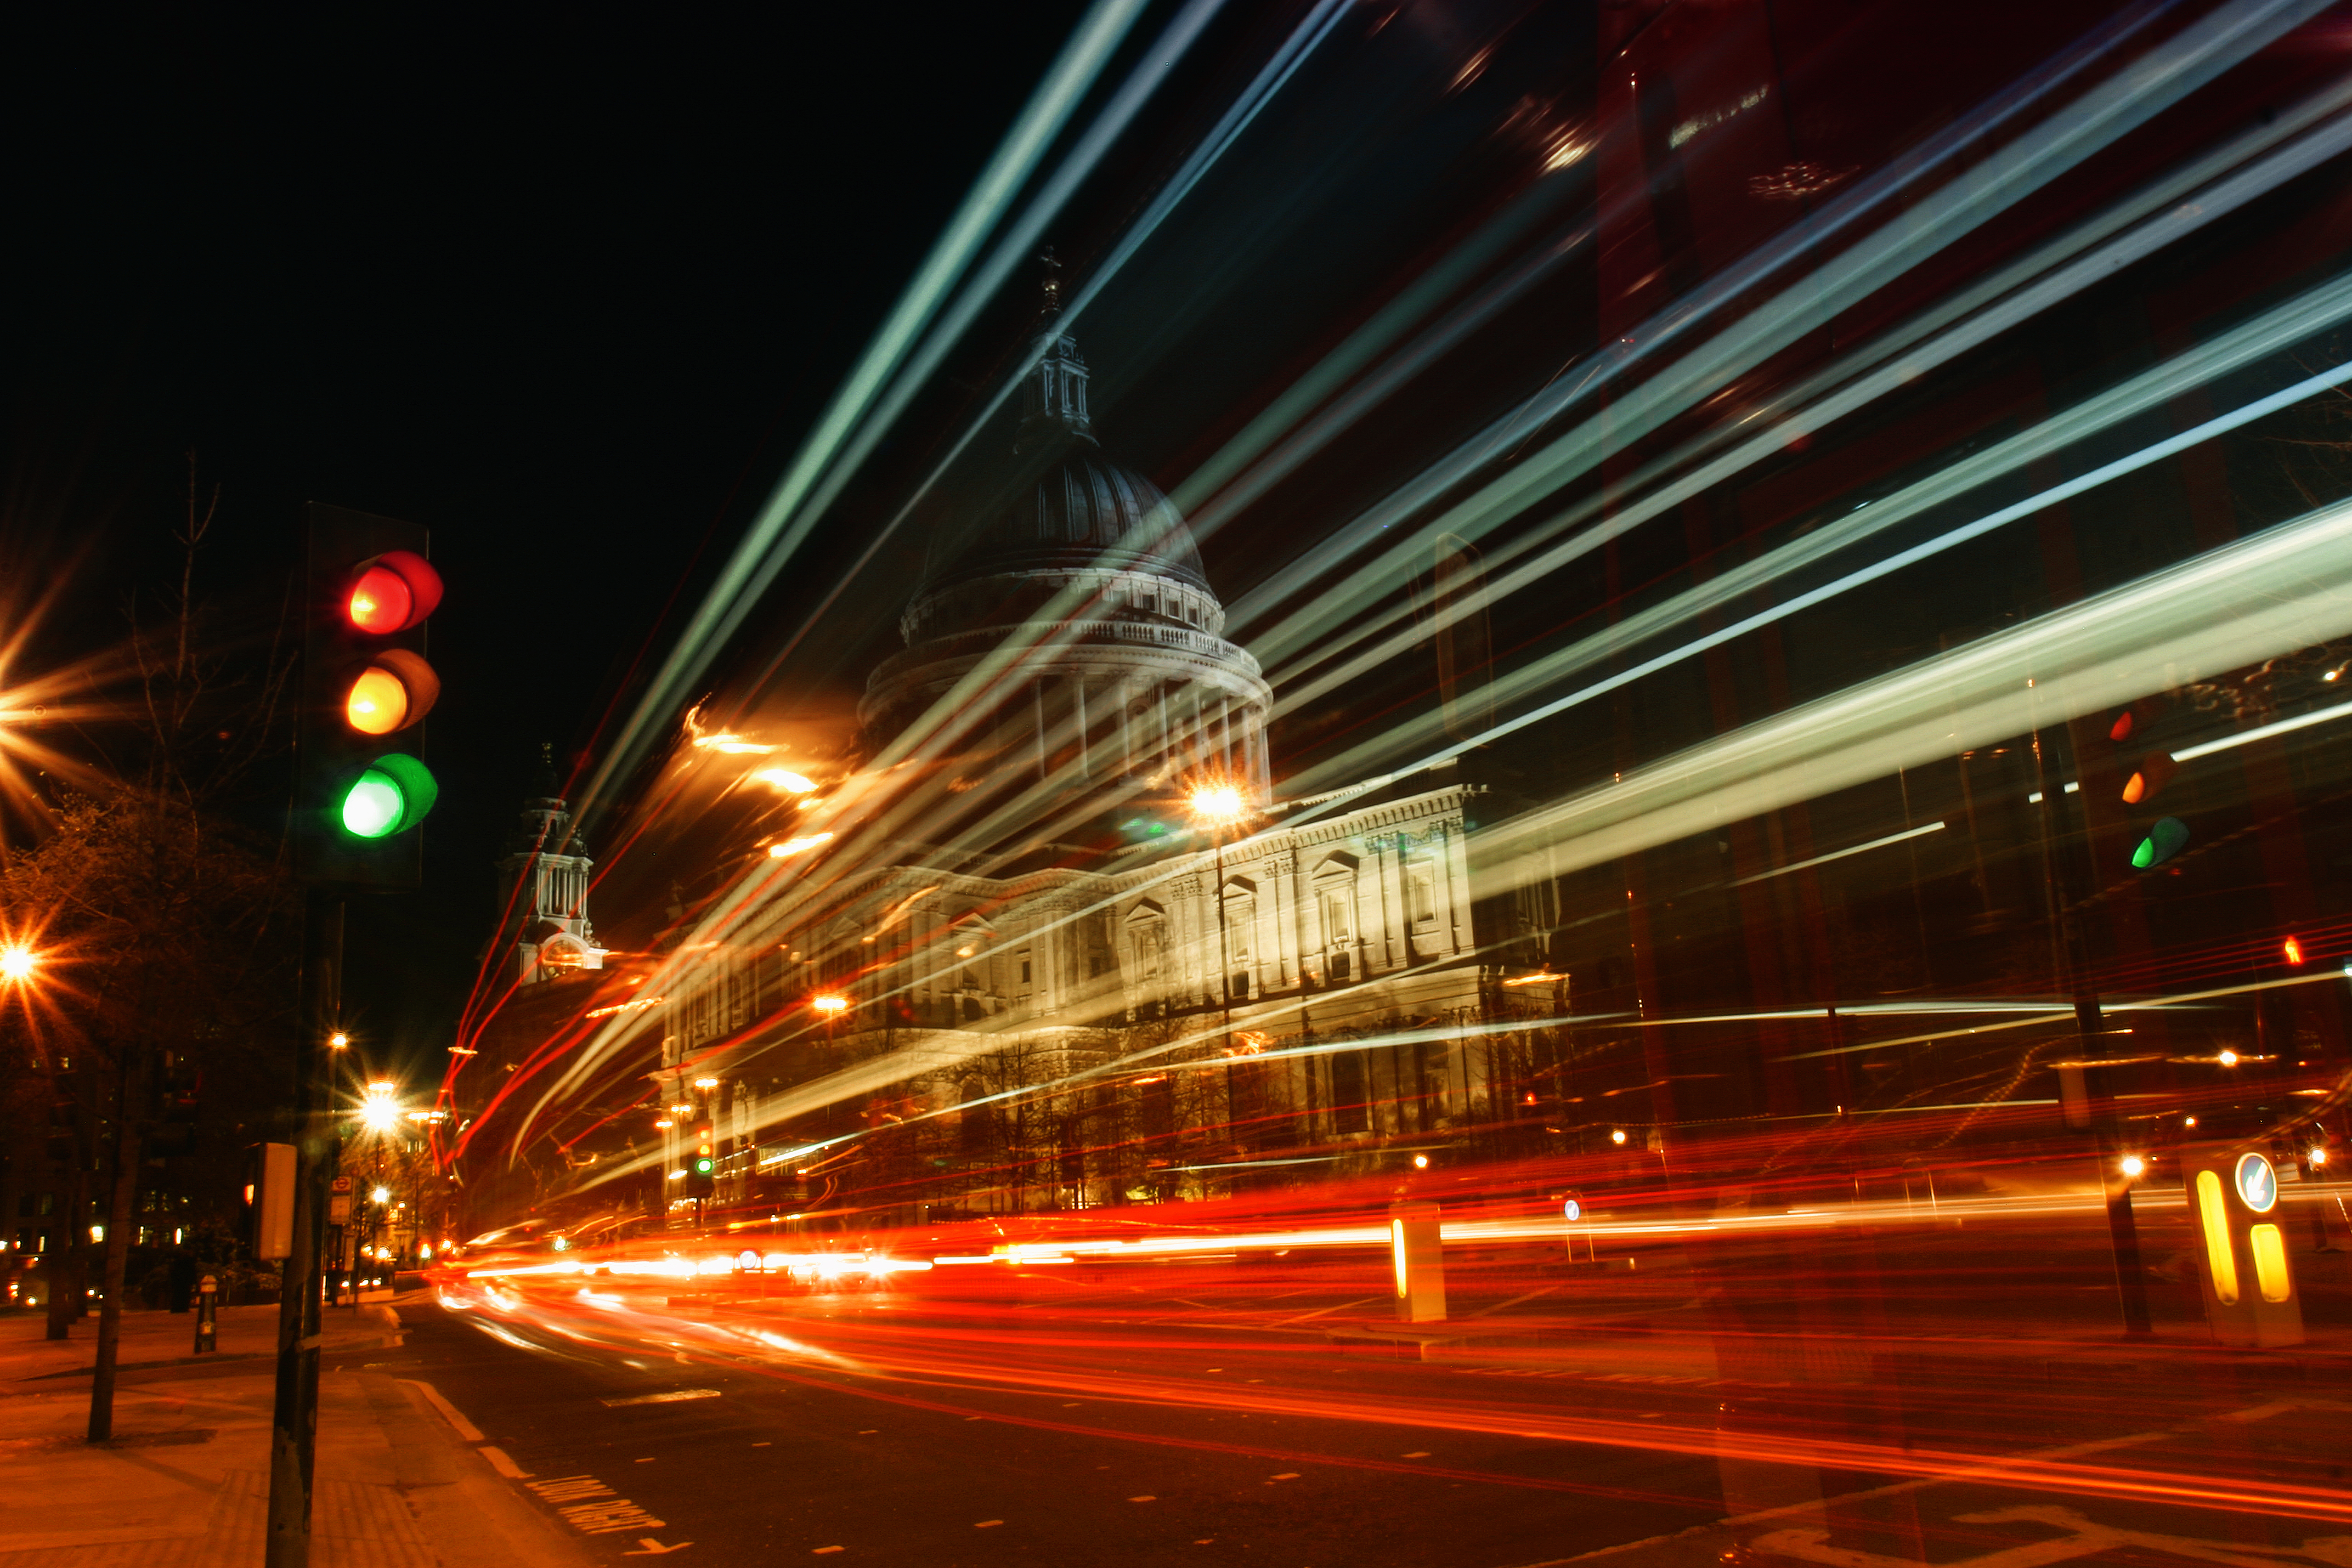 Night-time image of a busy road and traffic lights in a city 